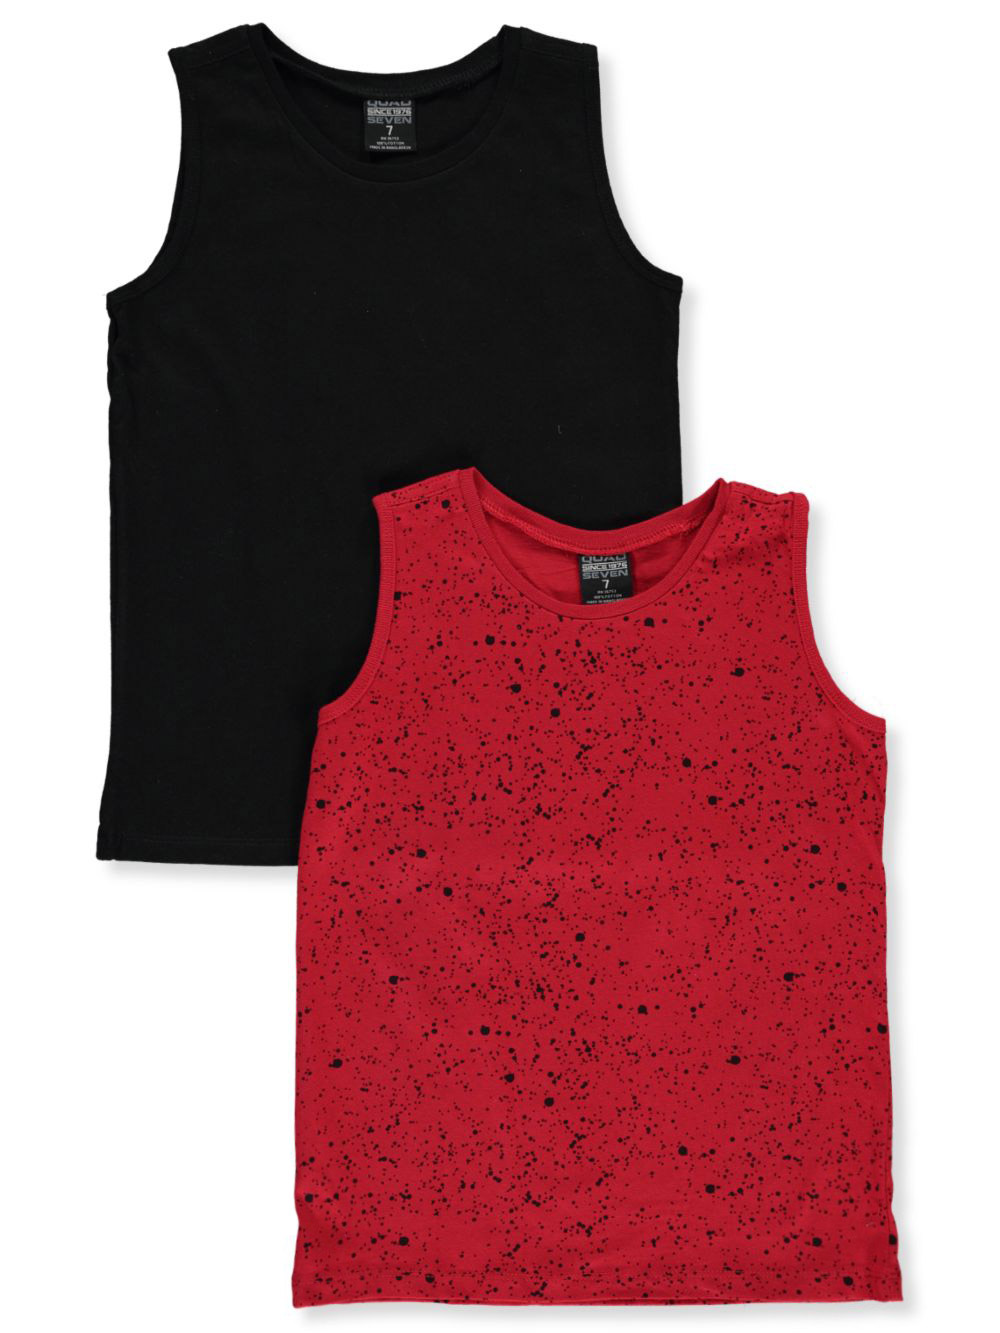 Boys Black and Red Tank